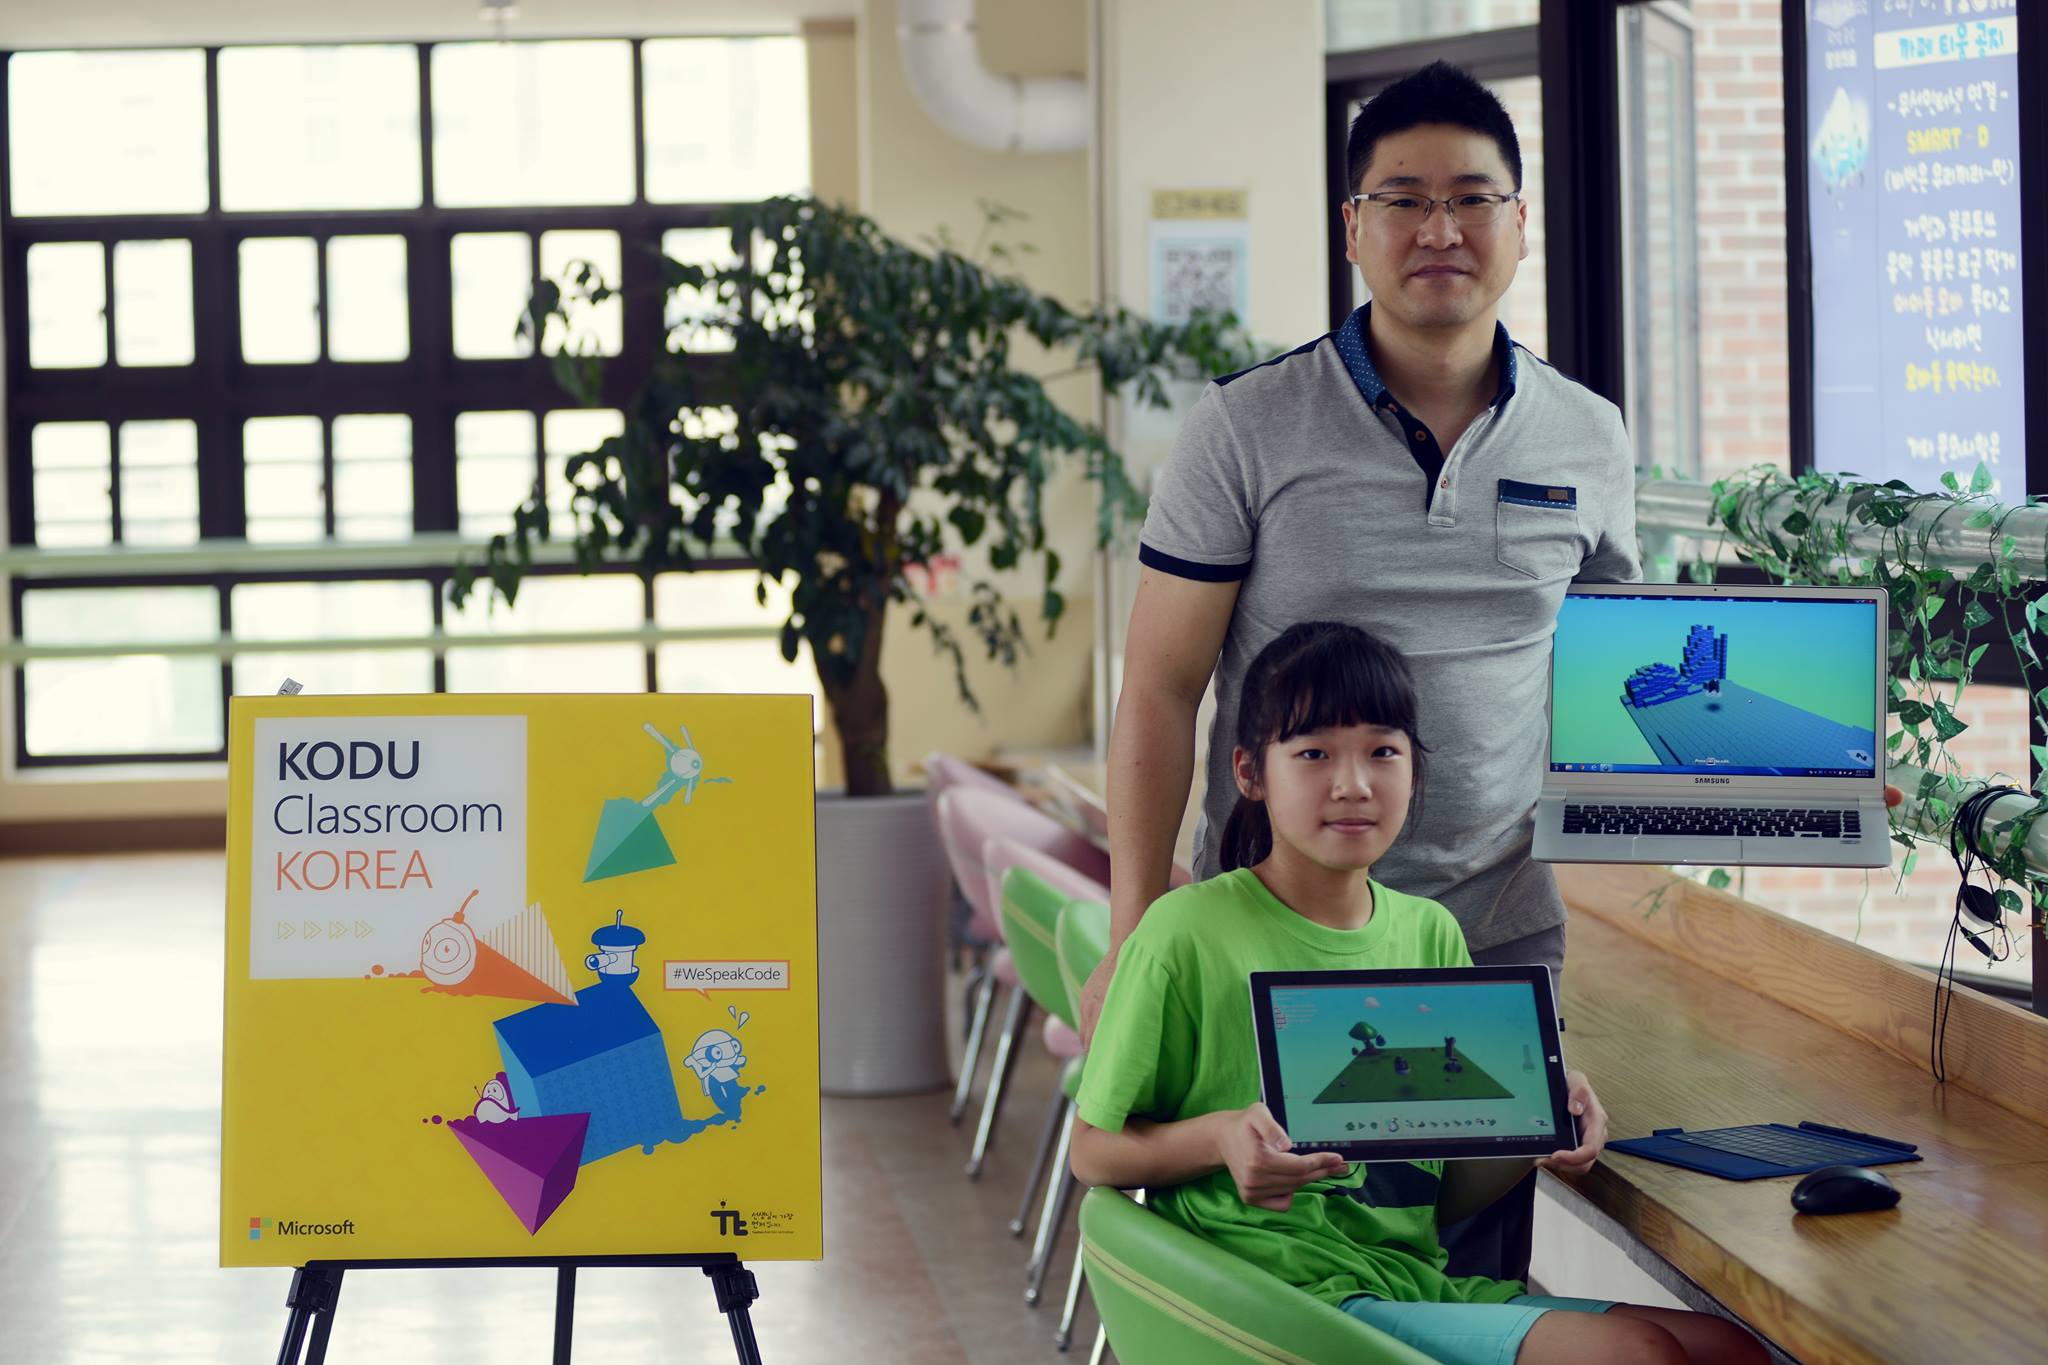 Youngsang Cho, an elementary school teacher in South Korea, said Kodu Game Lab enabled young students to use their imagination to create their own worlds through code.